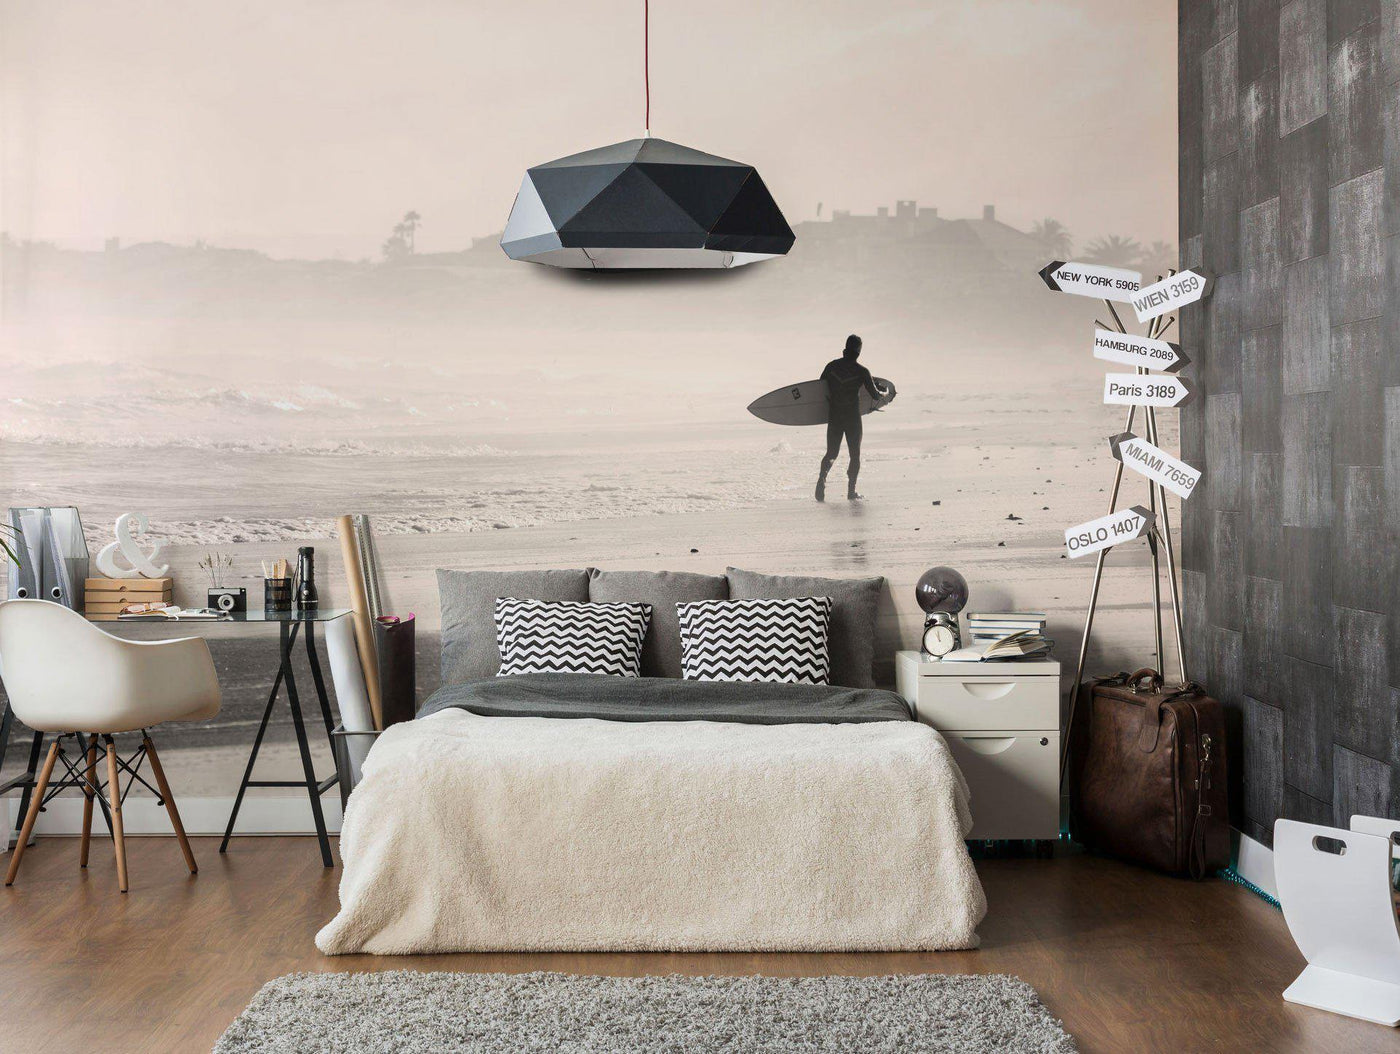 Early Morning Surf Wall Mural-Wall Mural-Eazywallz